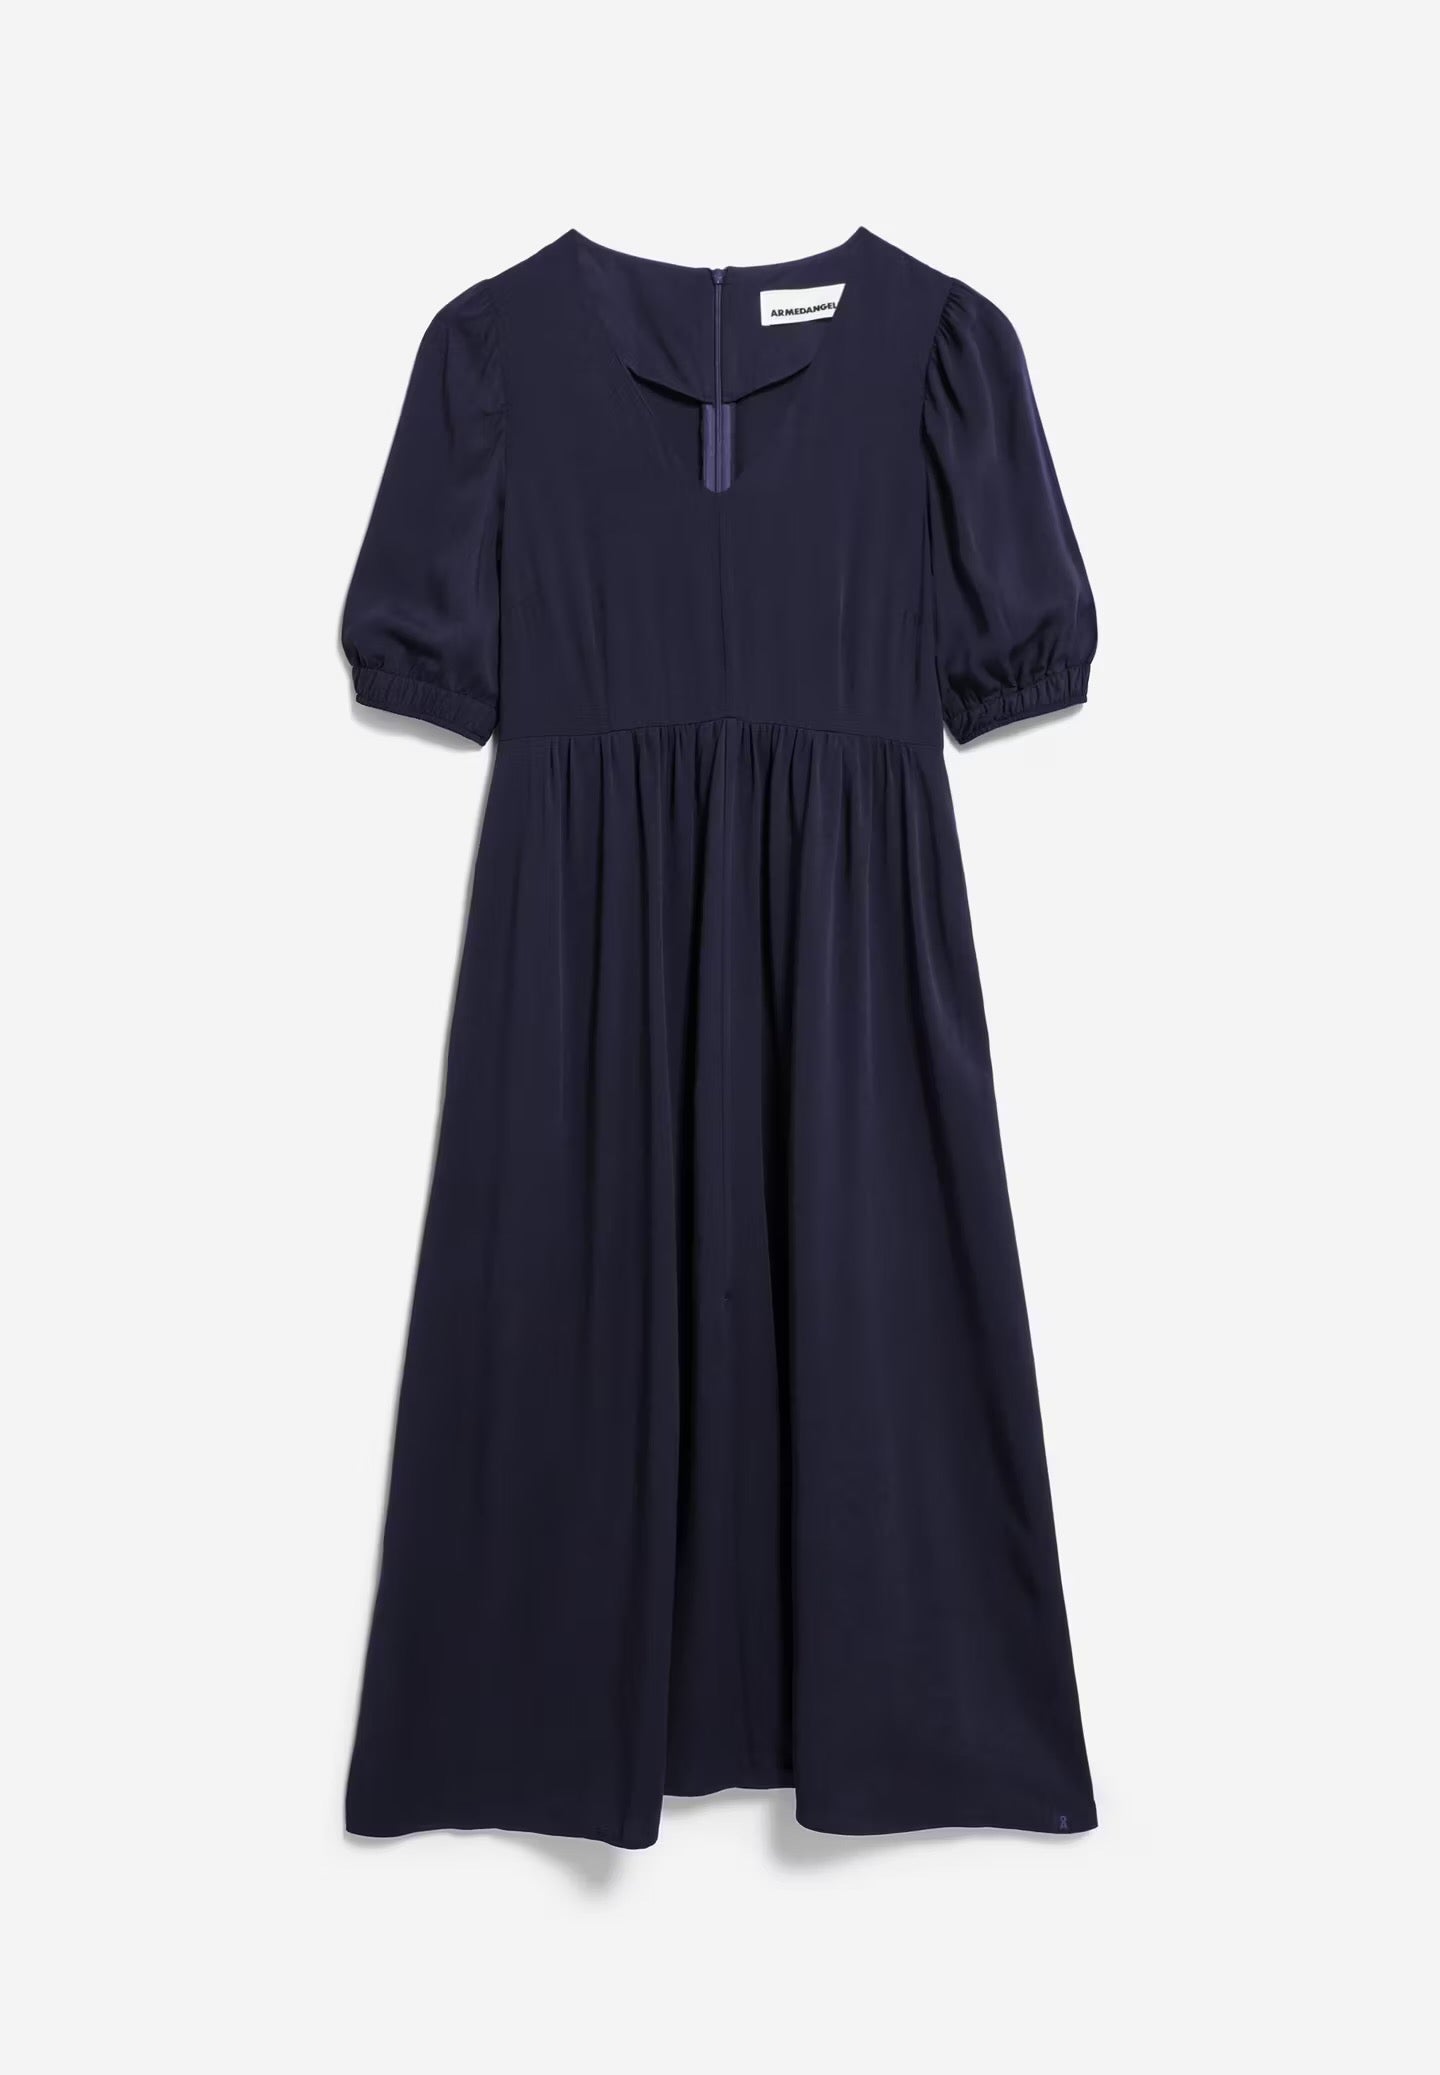 Midi length dress in navy blue from Armedangels, with 1/2 balloon sleeves and a v-neck, made from Ecovero viscose.